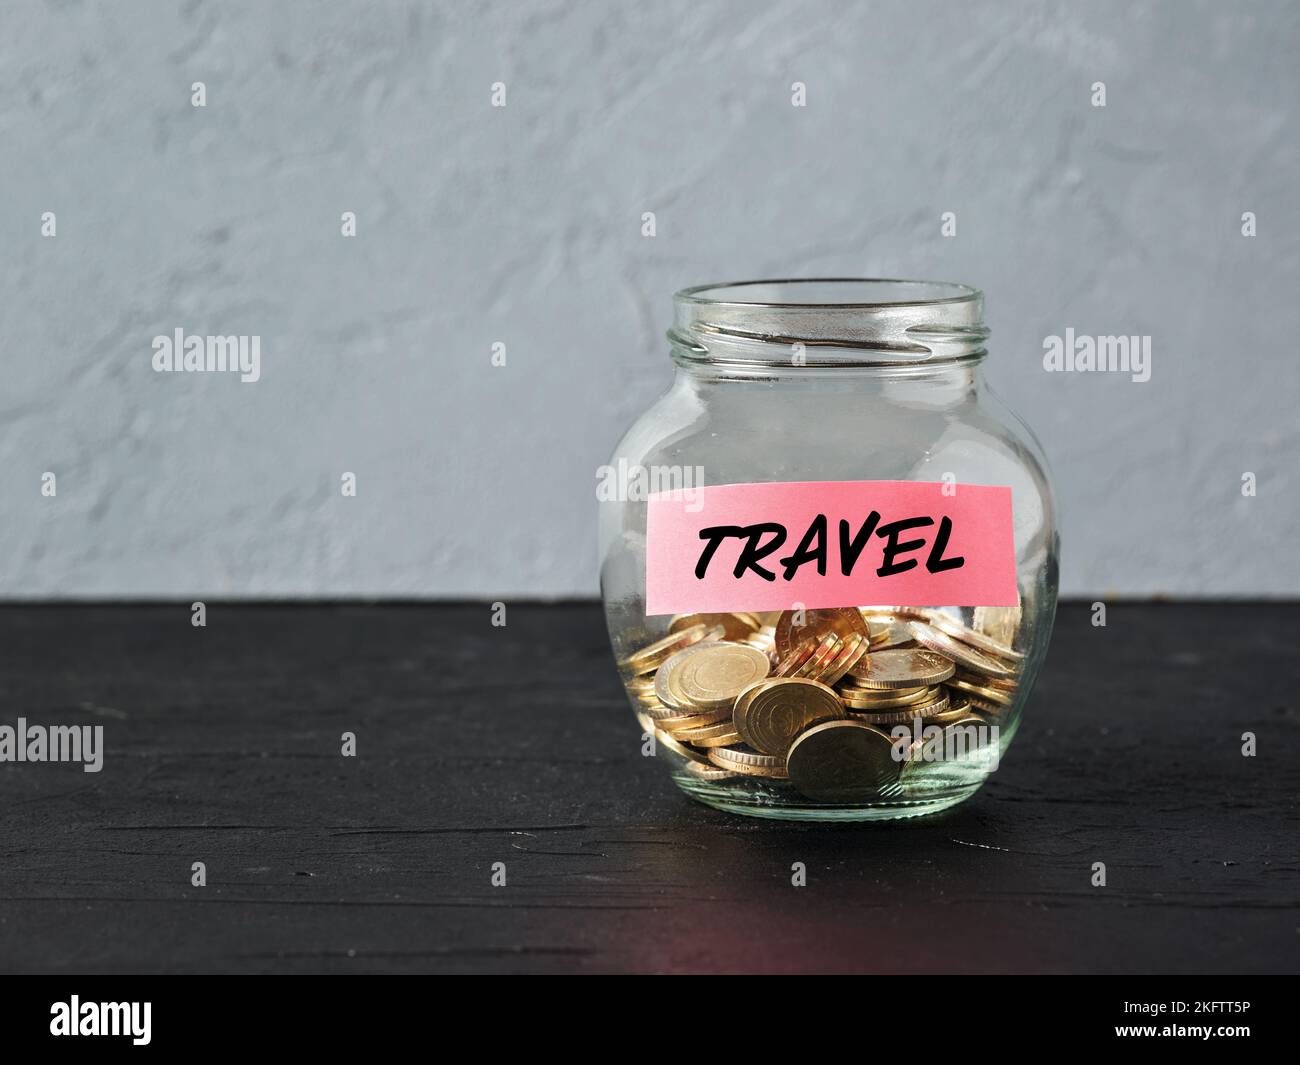 Glass jar with coins and the word travel on a label. Saving money for holiday travel and budget for vacation. Stock Photo